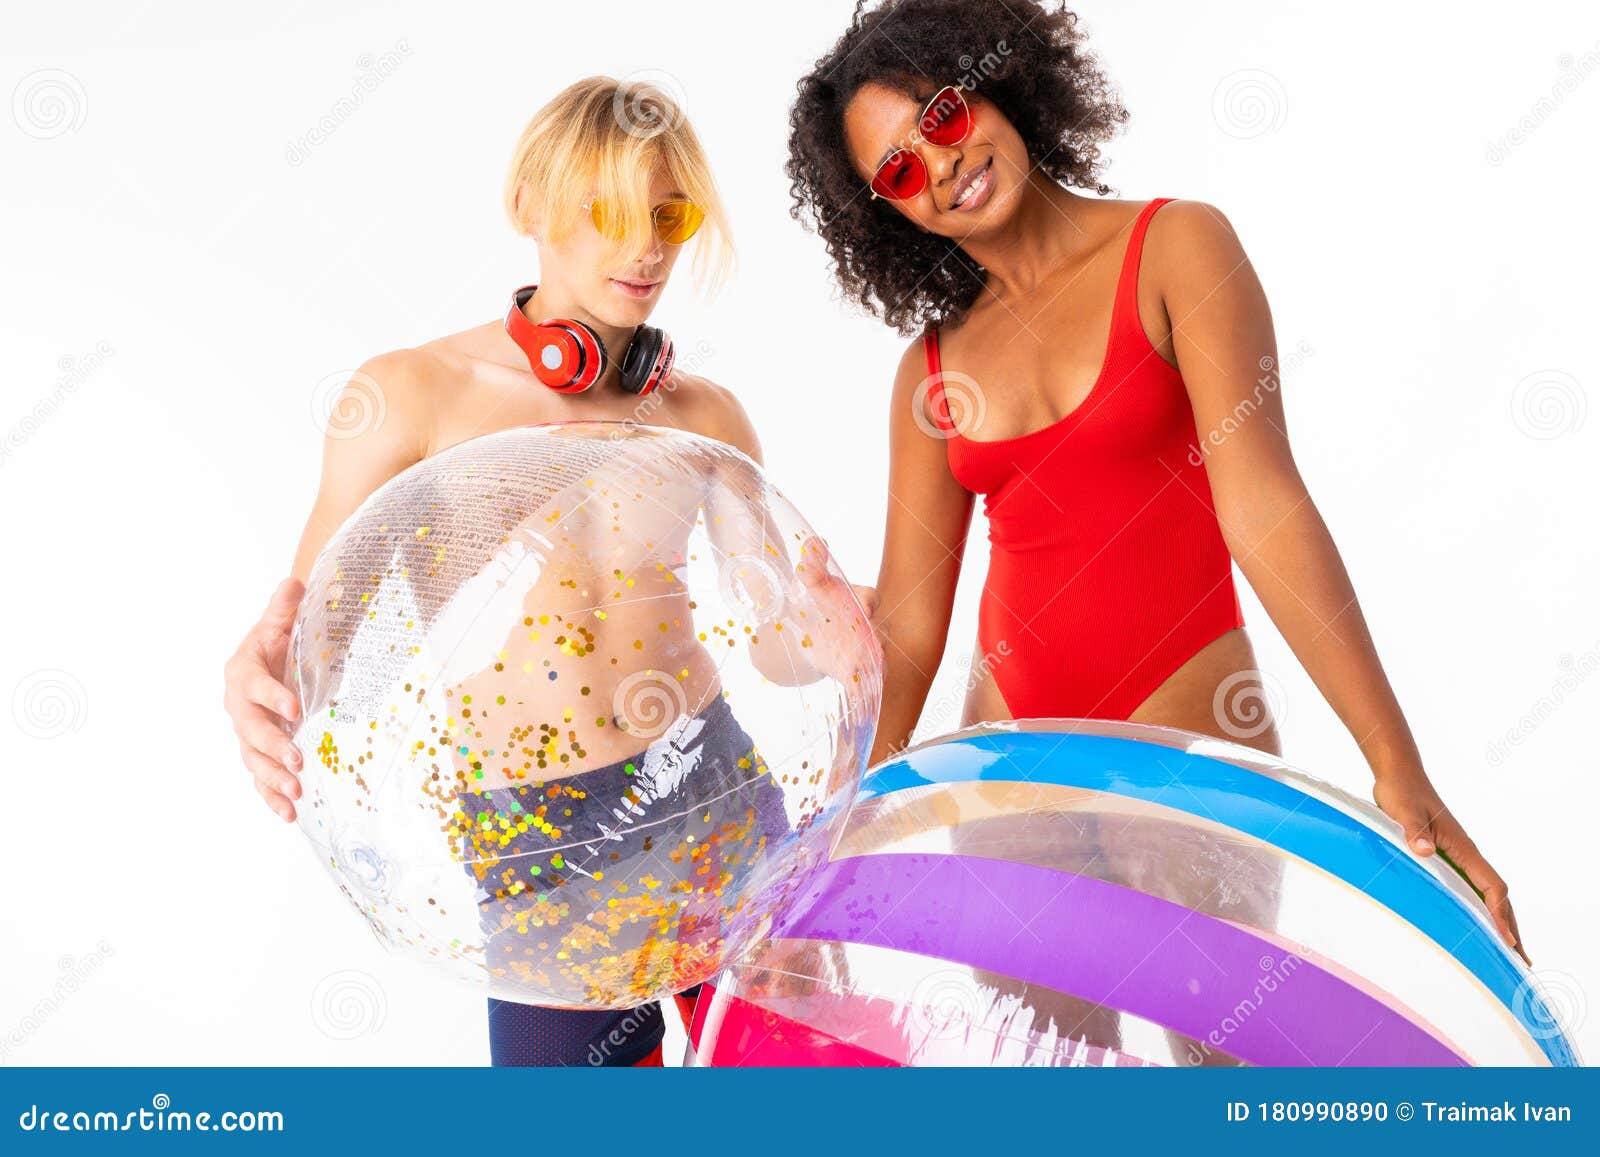 https://thumbs.dreamstime.com/z/african-female-caucasian-blonde-man-stands-swimsuit-big-rubber-balls-smiles-isolated-white-african-female-180990890.jpg